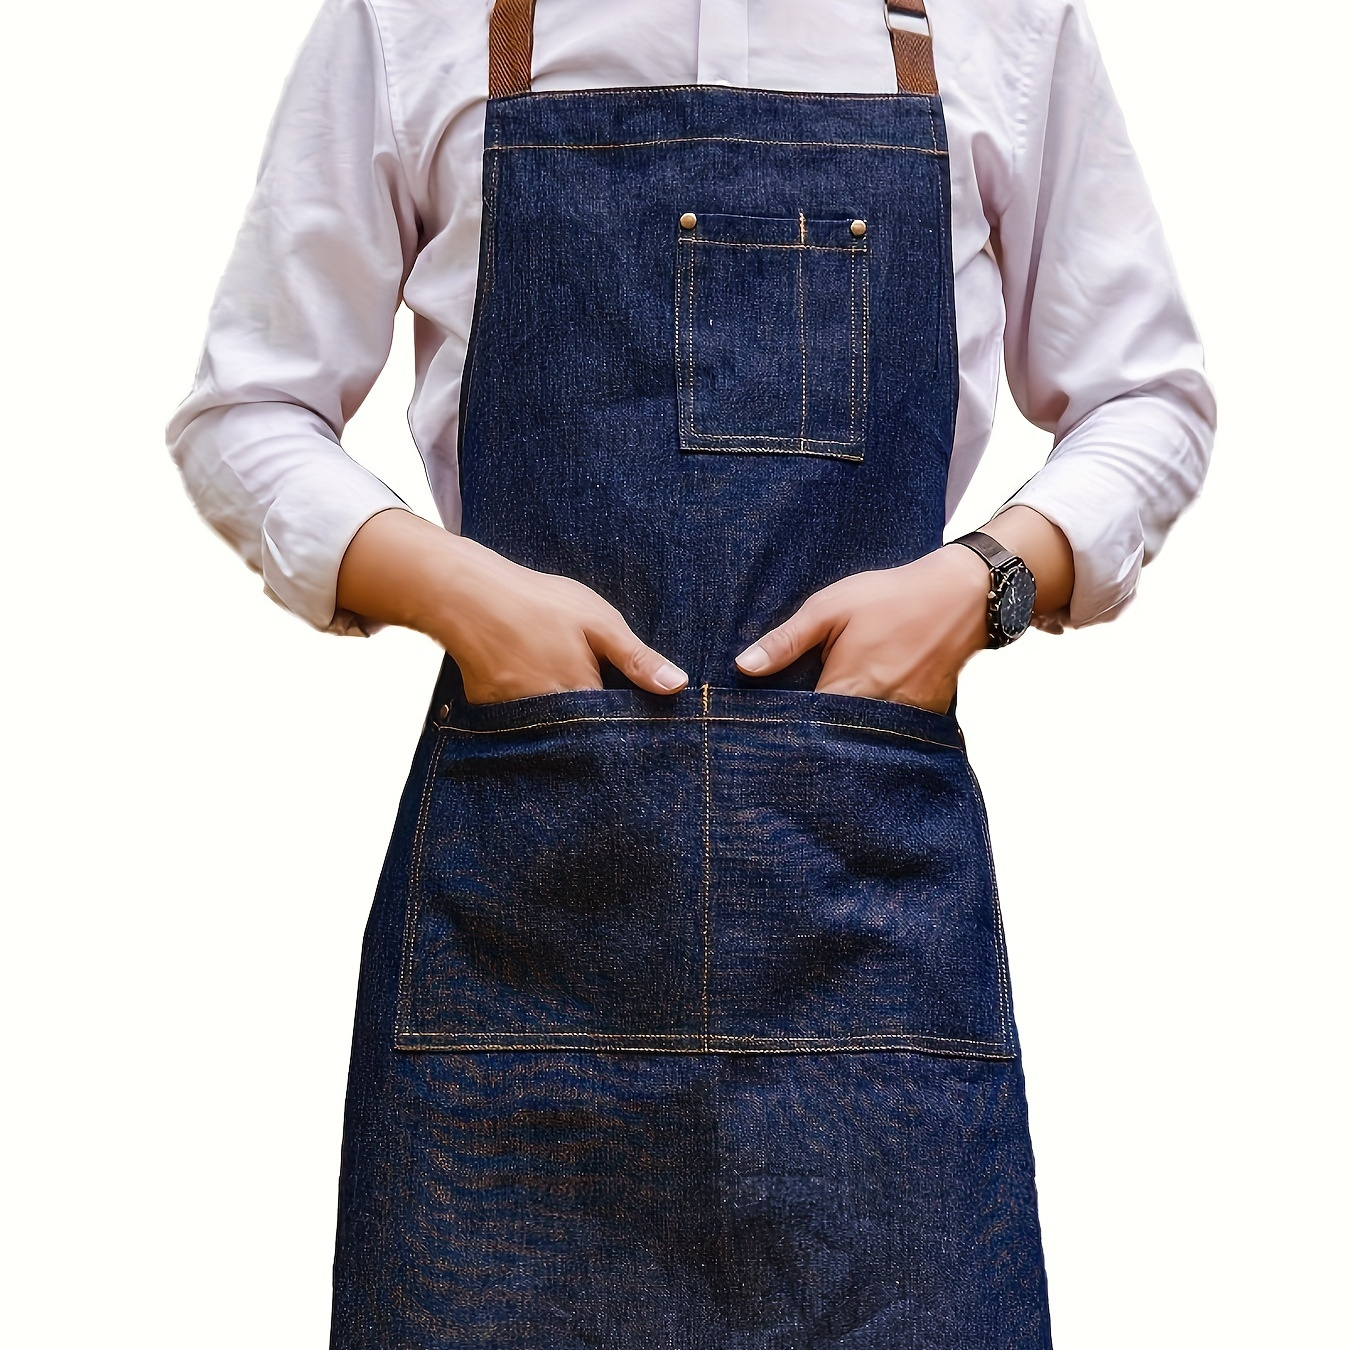 

Men's Adjustable Denim Apron With 3 Pockets, Perfect For Grilling, Cooking, Ideal For Chefs And Waitstaff